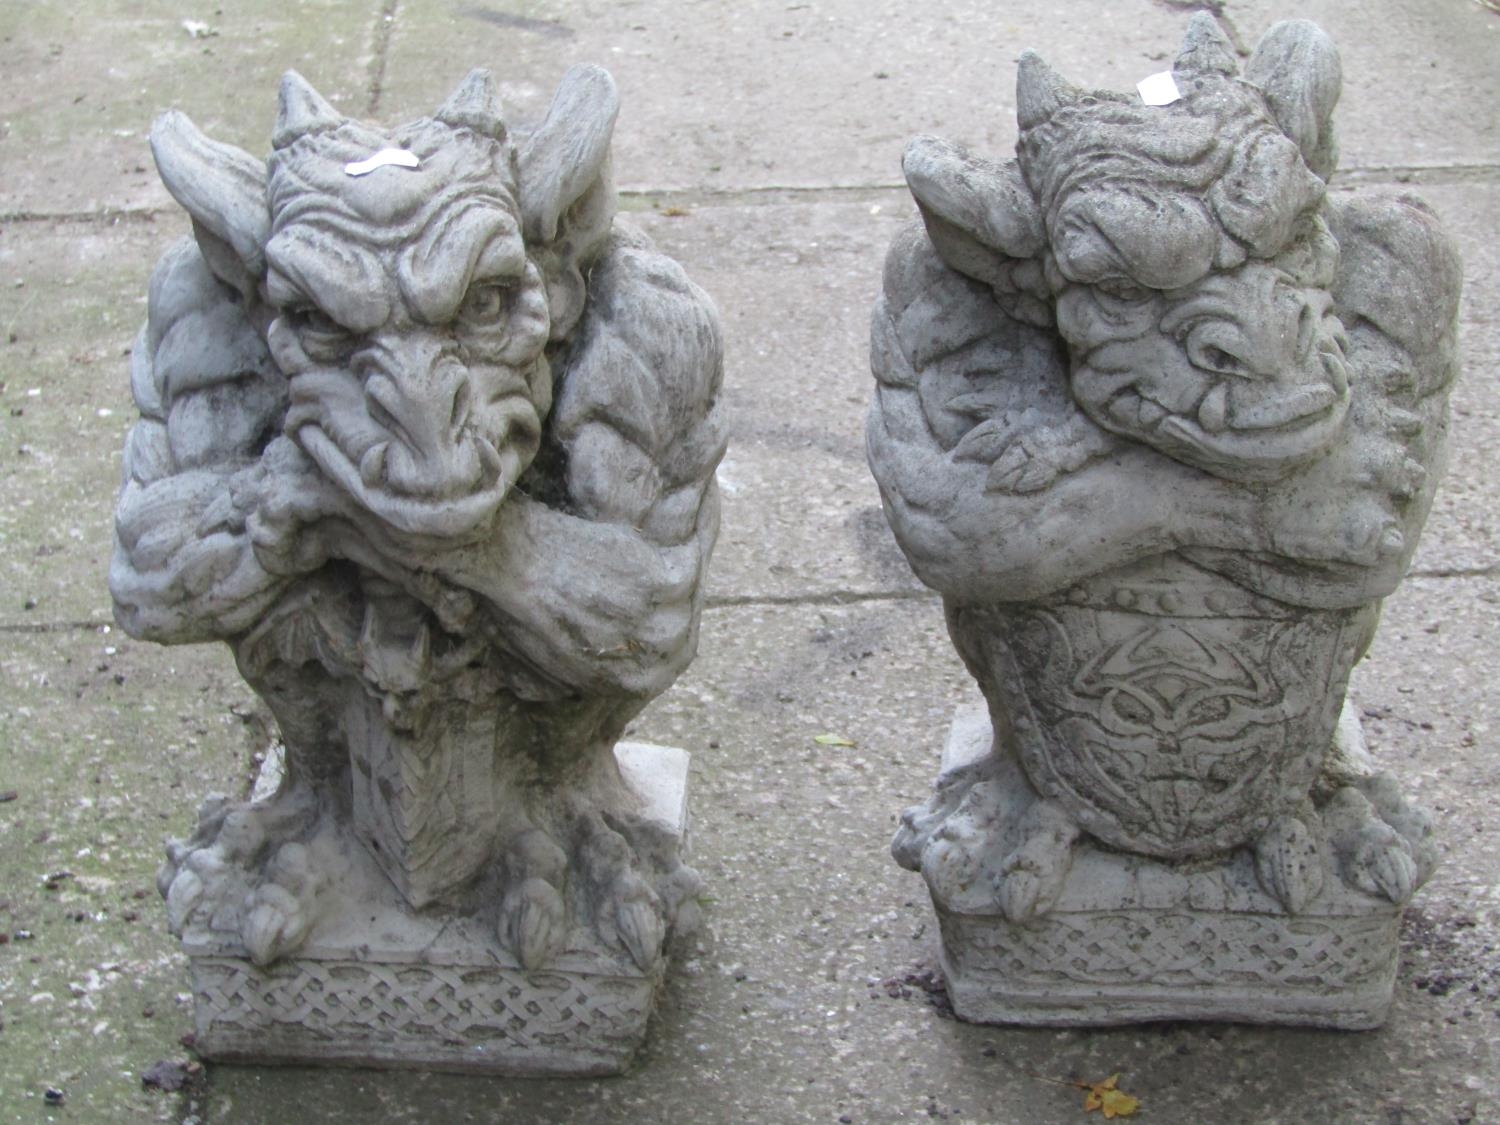 Two similar composition stone gargoyle ornaments with shield and celtic knot detail, 38 cm high